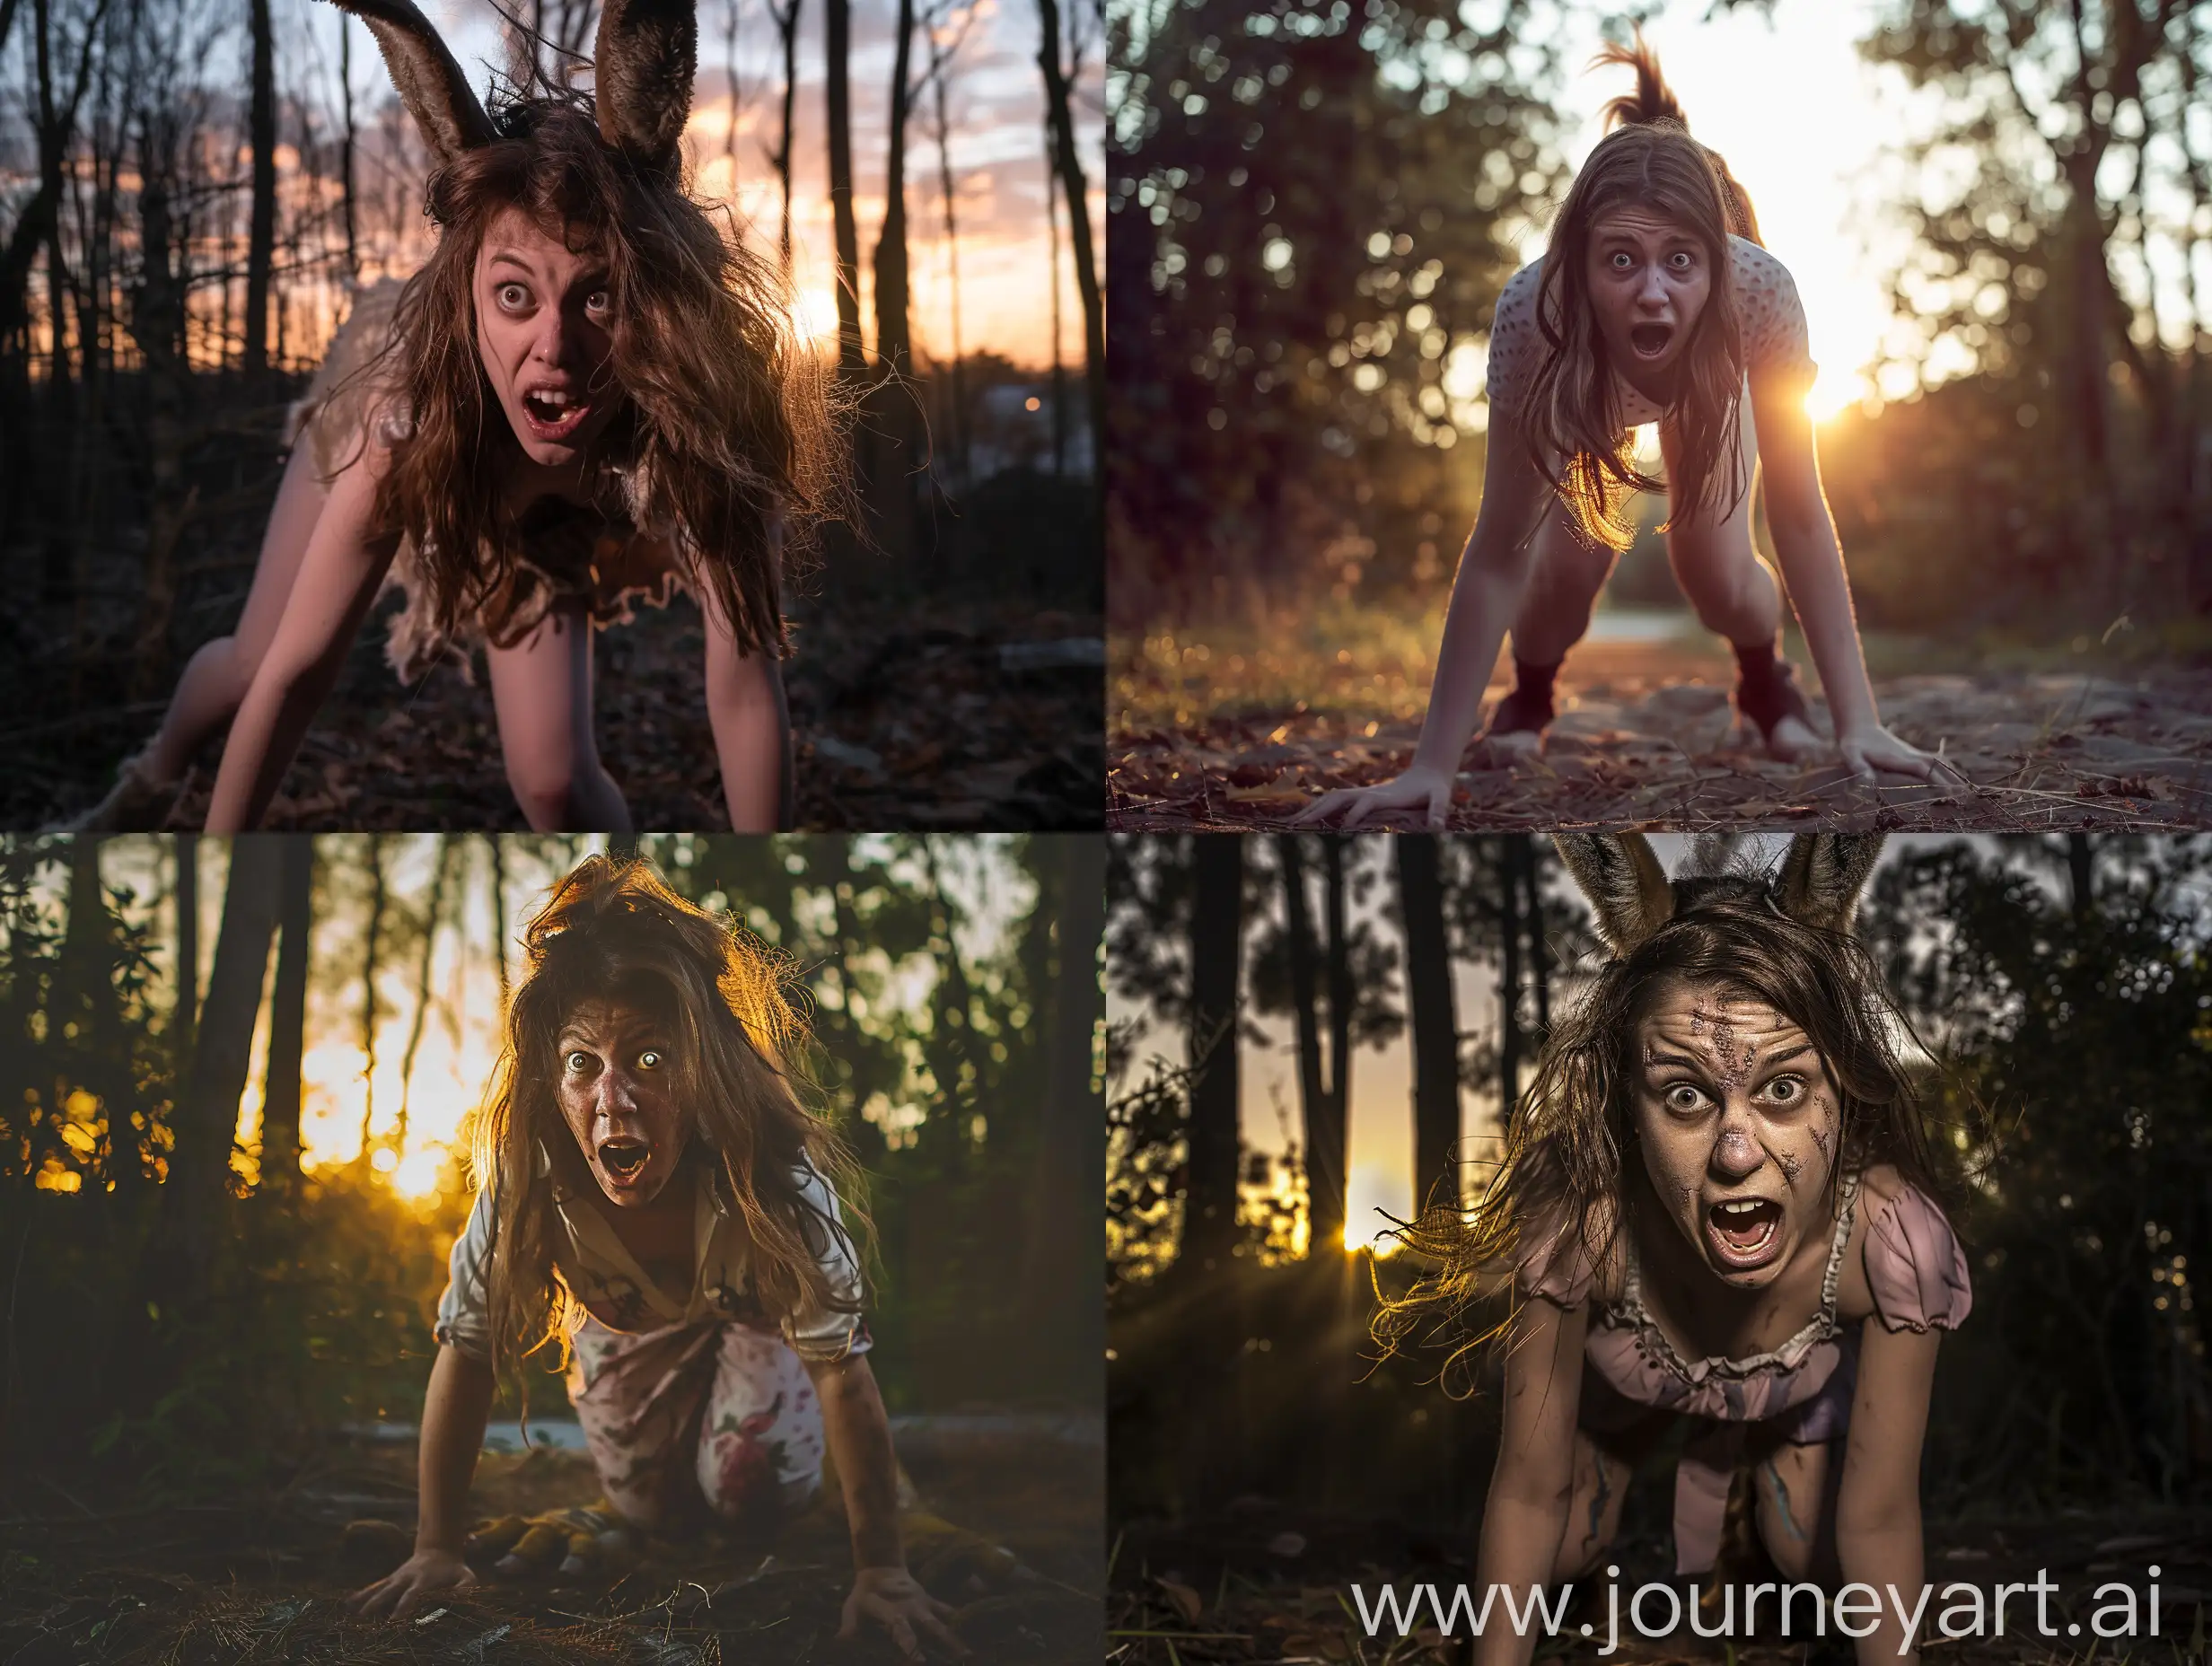 A young woman with loose brown hair, who has been transformed into a donkey. The photo is taken while the transformation is almost completed. She is standing on all fours in a forest at sunset. She has a desperate expression, screaming for help. Realistic photograph, full body picture.